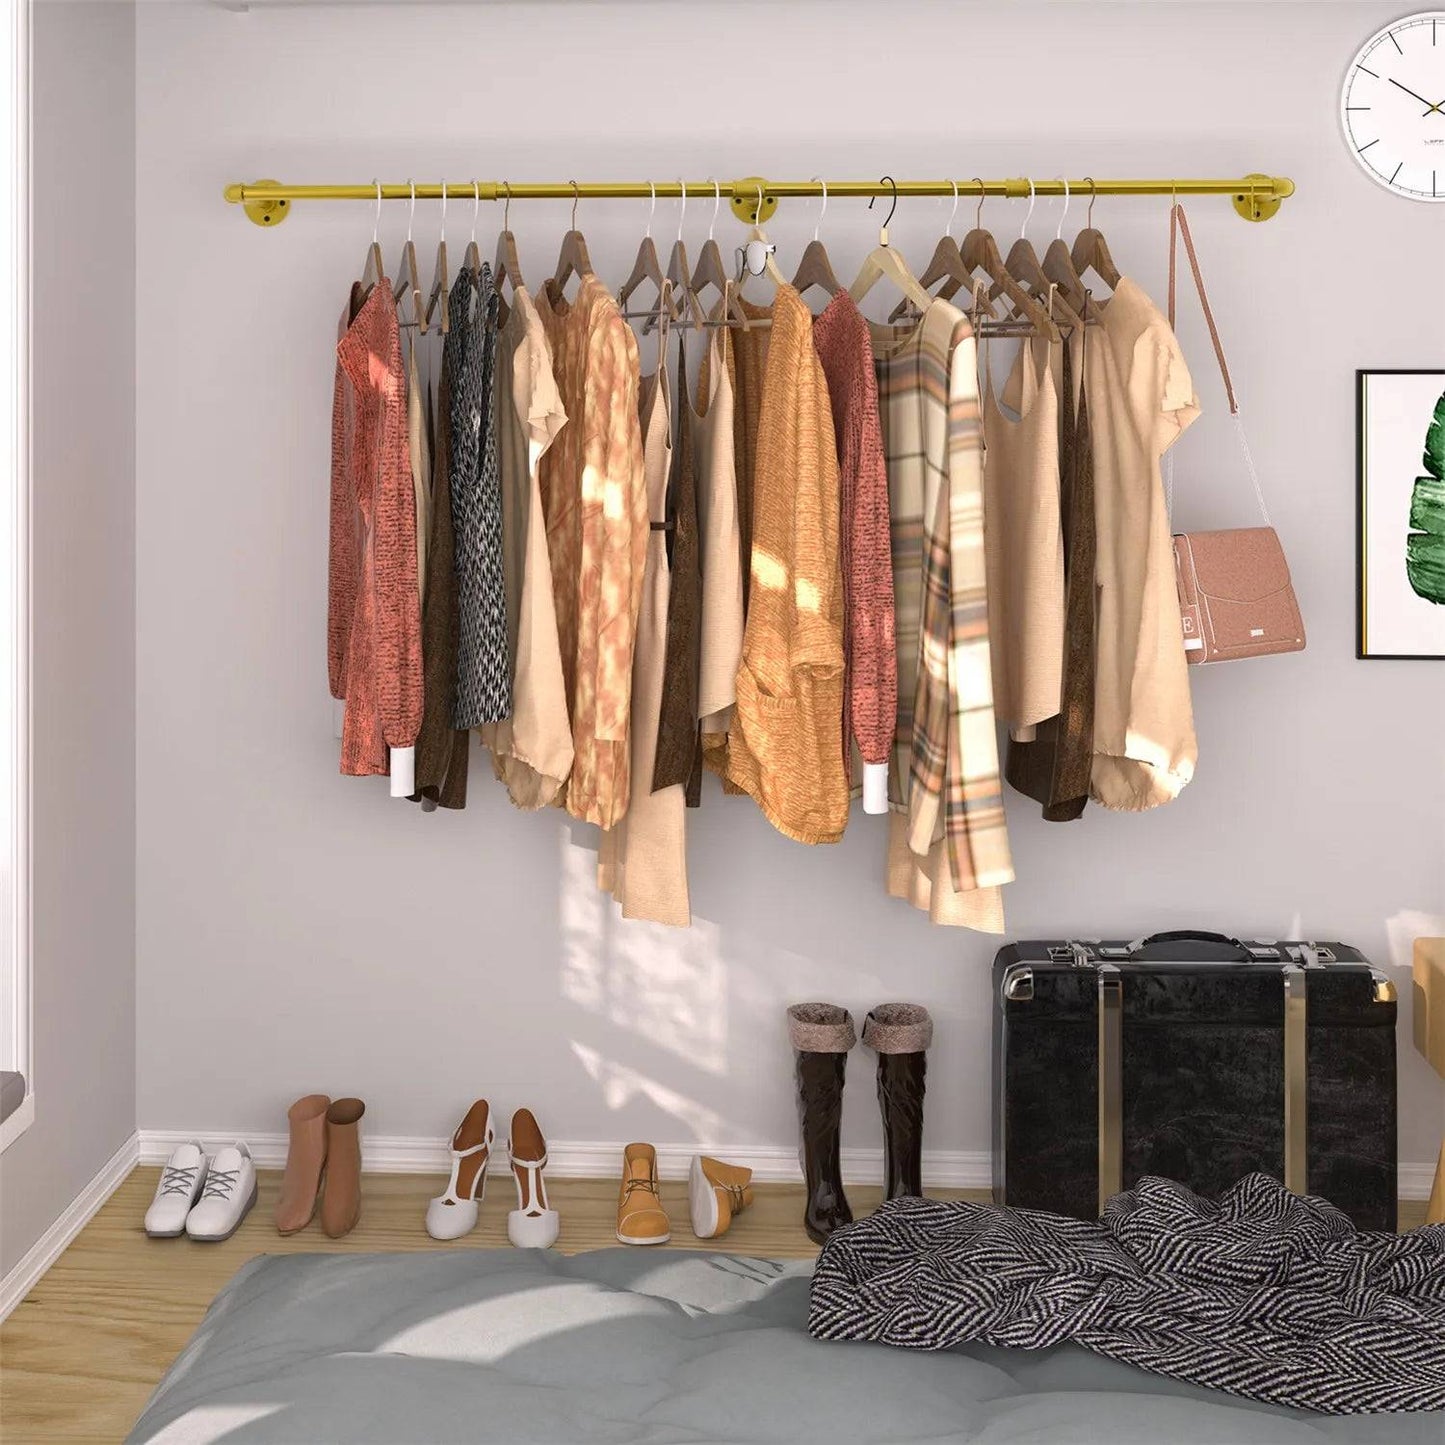 Chic-Industrial Style Wall-Mounted Clothes Rack - Coat Racks - KonnaLiving